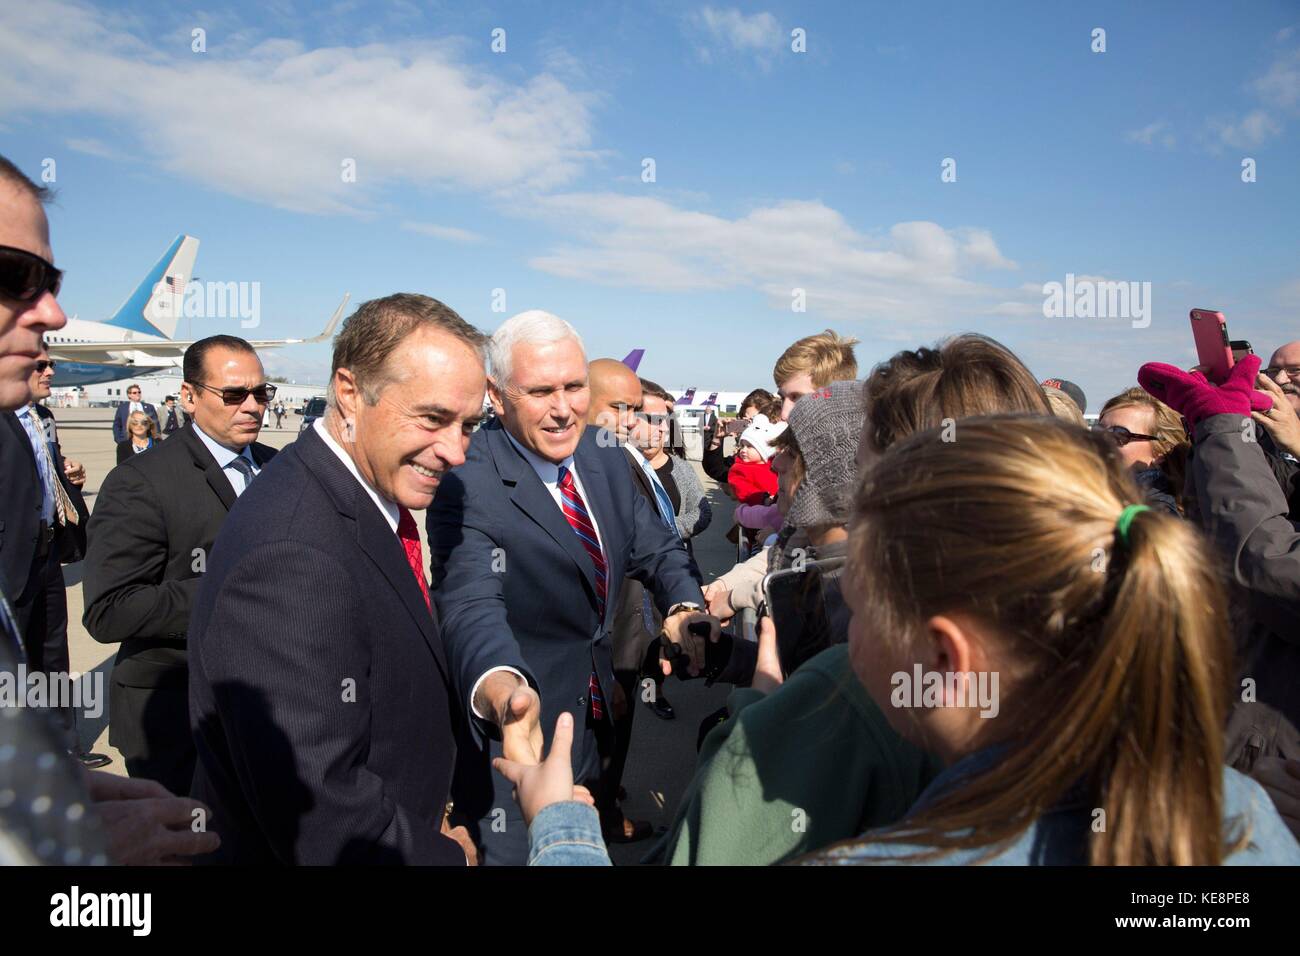 U.S. Vice President Mike Pence, center, greets supporters alongside Rep. Chris Collins on arrival at Buffalo Niagara International Airport October 17, 2017 in Buffalo, New York. Pence held a tax cut discussion and then attended a Republican fundraiser for Congressmen Chris Collins. Stock Photo